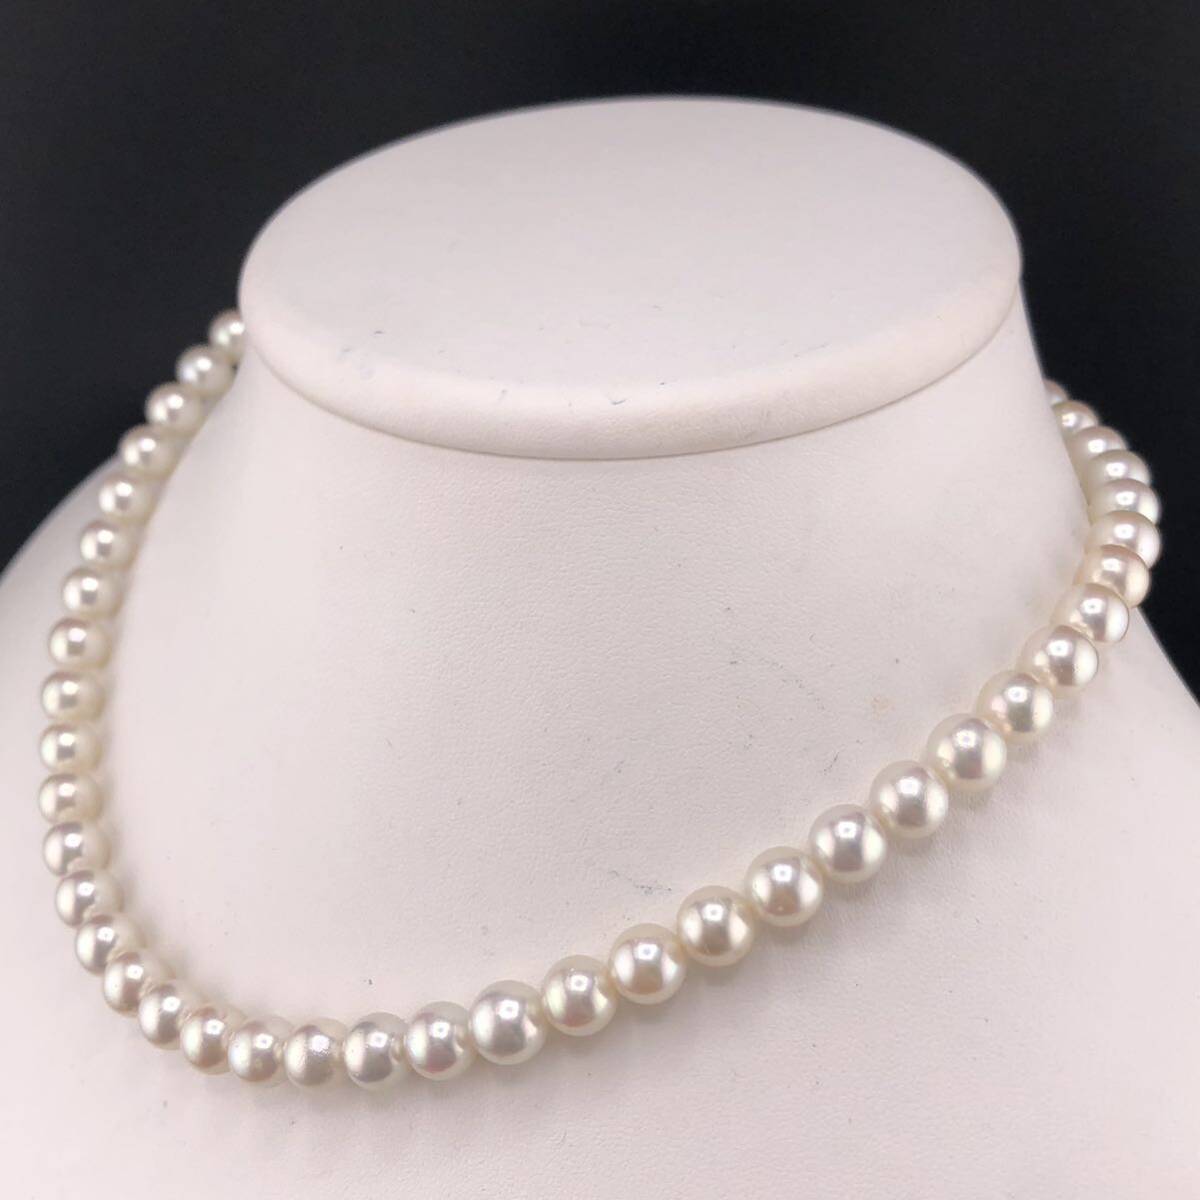 E04-6375 K18☆アコヤパールネックレス 7.5mm~8.0mm 41cm 34.9g ( アコヤ真珠 Pearl necklace SILVER )の画像2